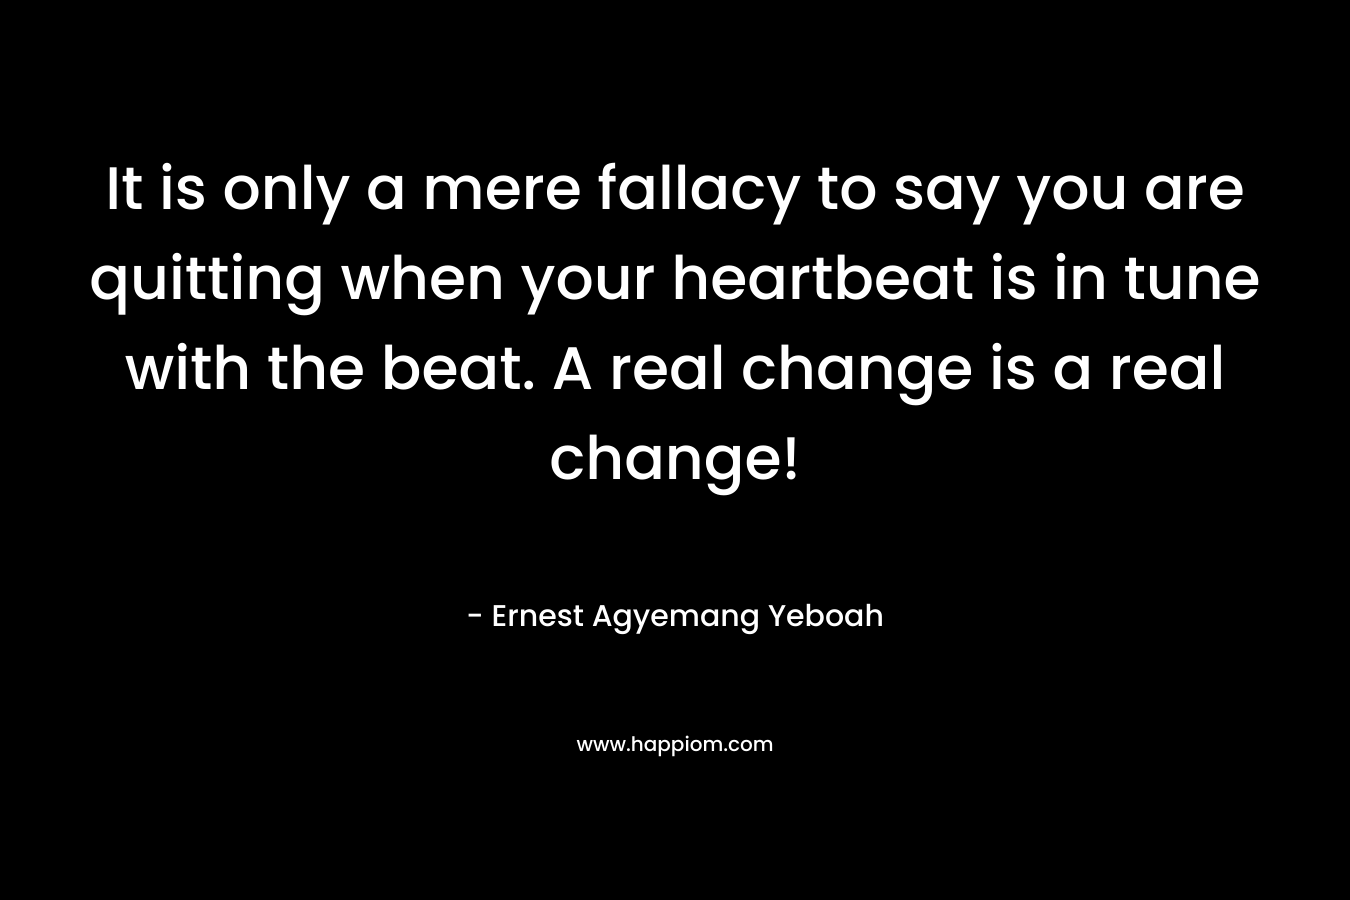 It is only a mere fallacy to say you are quitting when your heartbeat is in tune with the beat. A real change is a real change! – Ernest Agyemang Yeboah